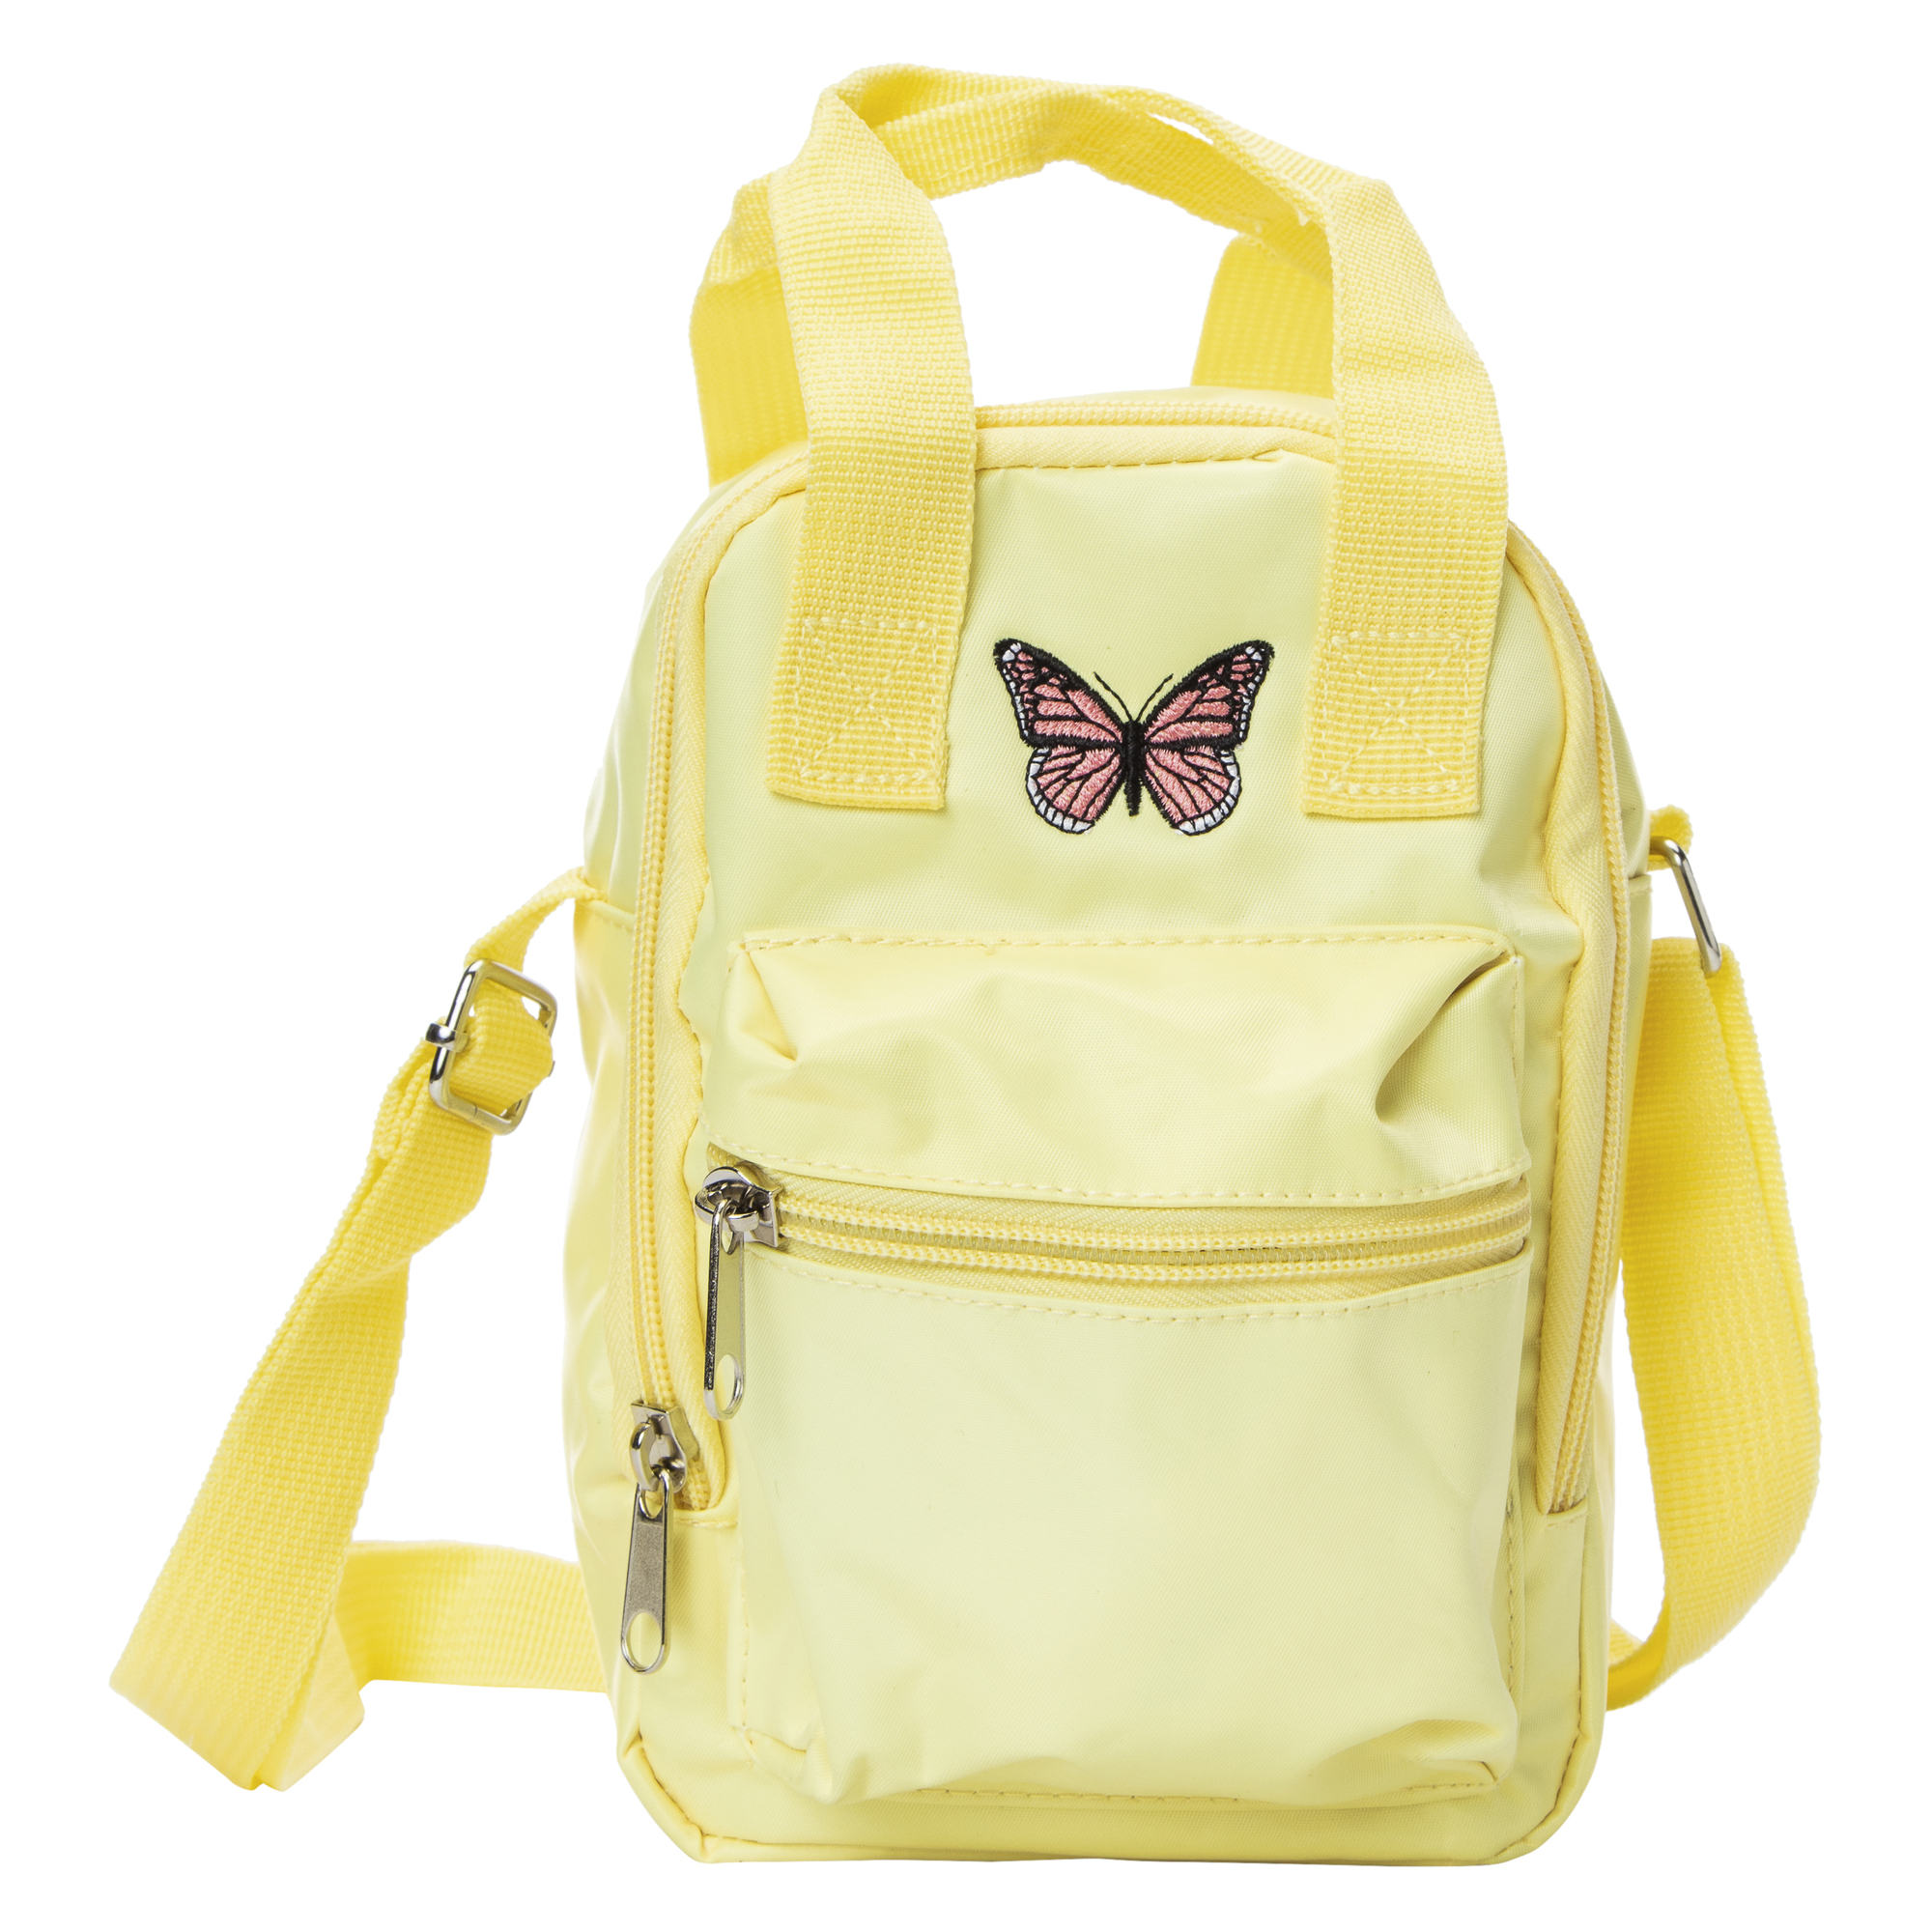 yellow super mini sling bag with embroidered butterfly icon 6in x 8in